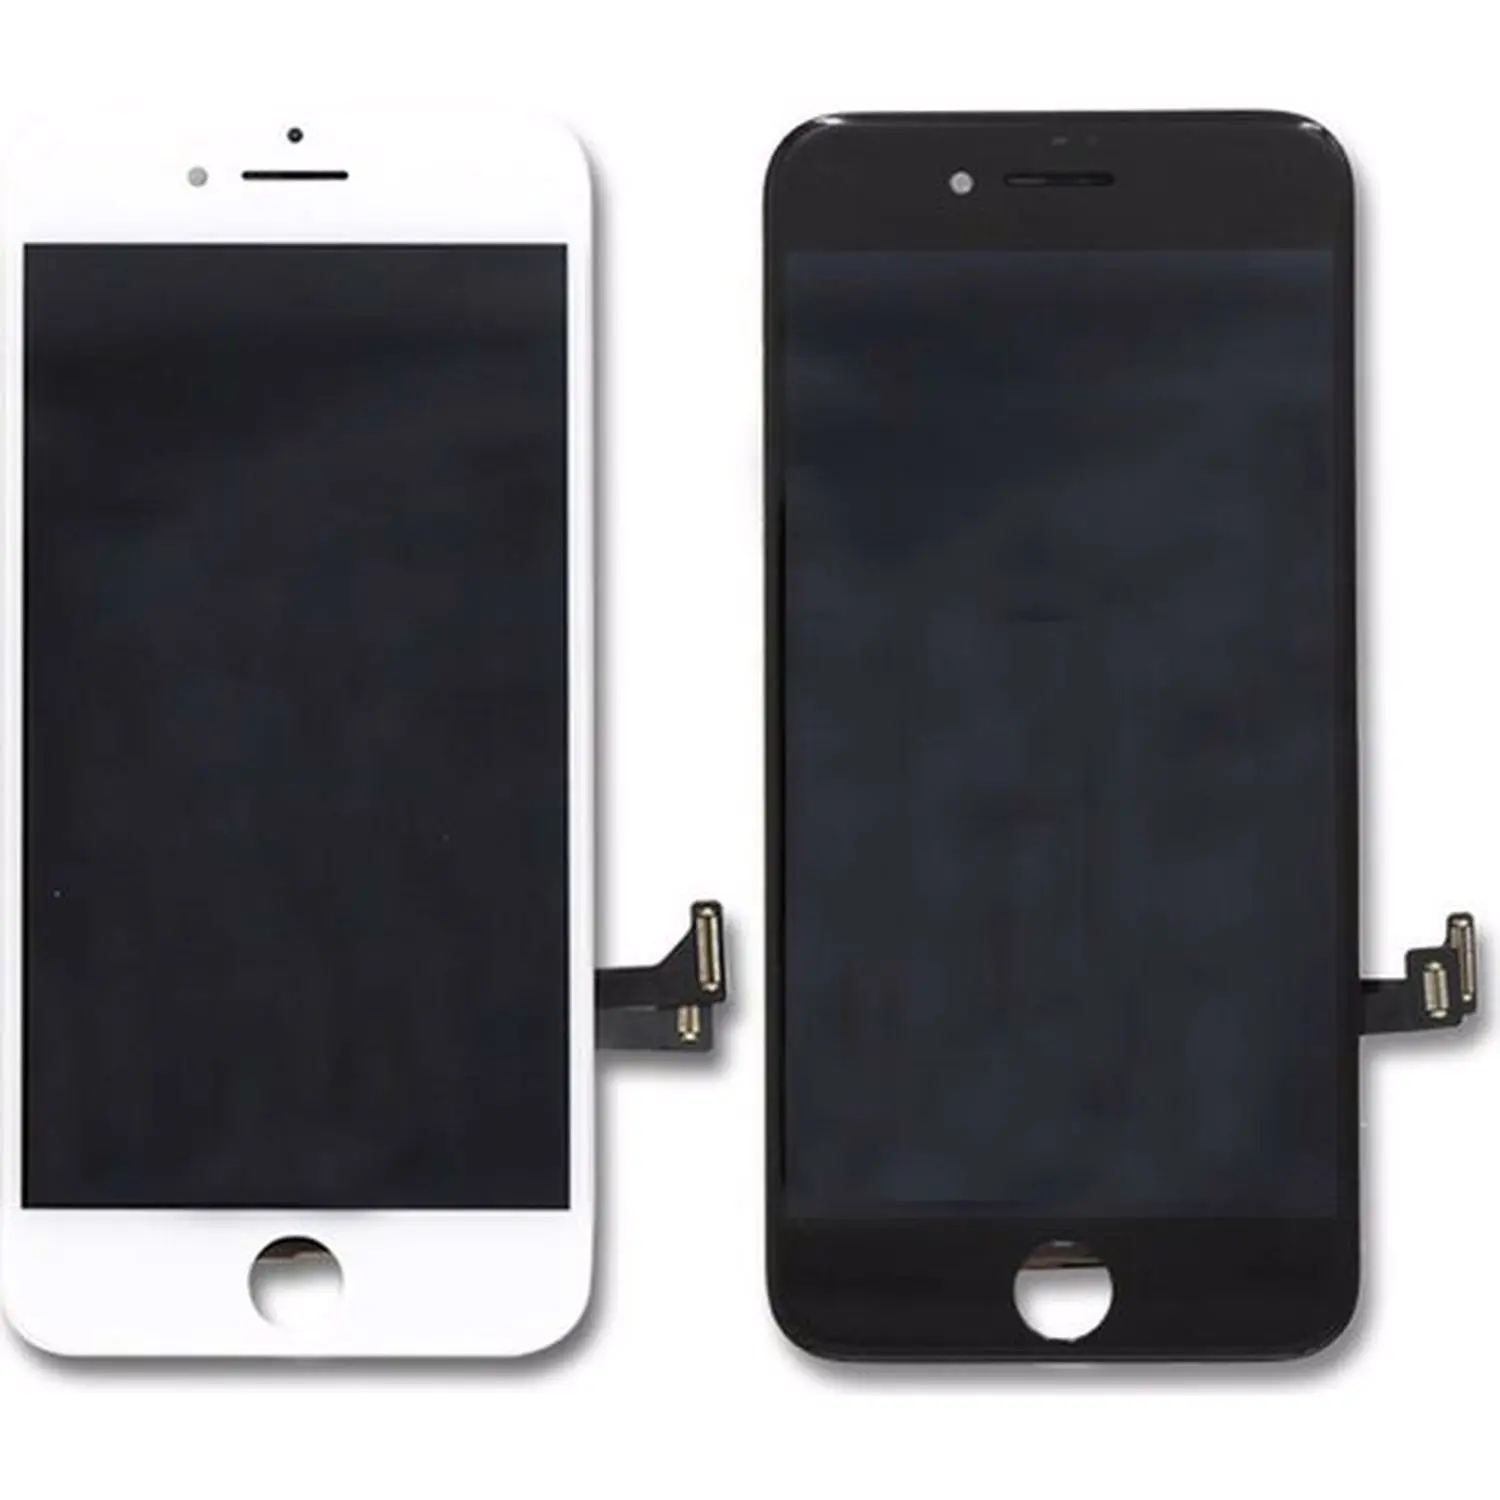 1. Quality Original Oem iphone 6 / 6s / 7 / 7s / 8 / 8s 6 plus 7 plus 8 plus lcd touch screen and panel easy installation warranty enlarge